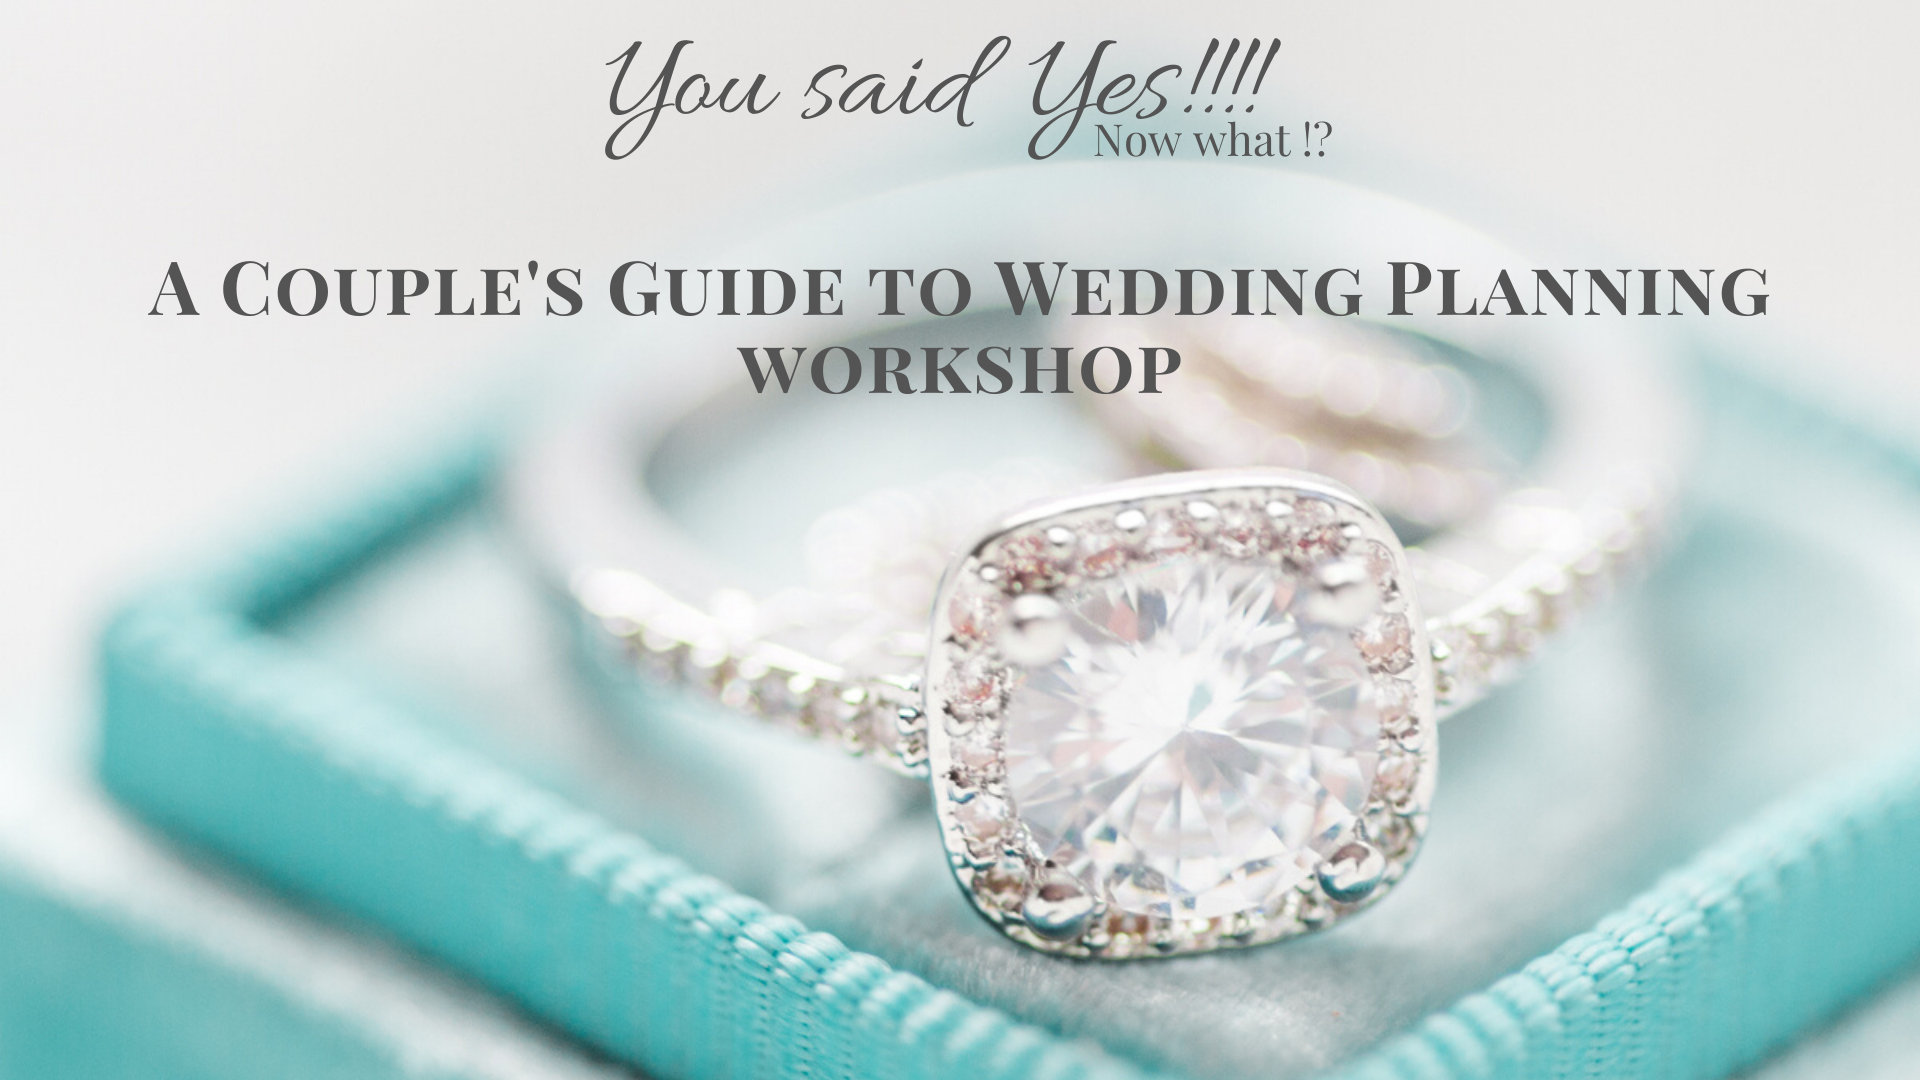  A Couple's Guide to Wedding Planning